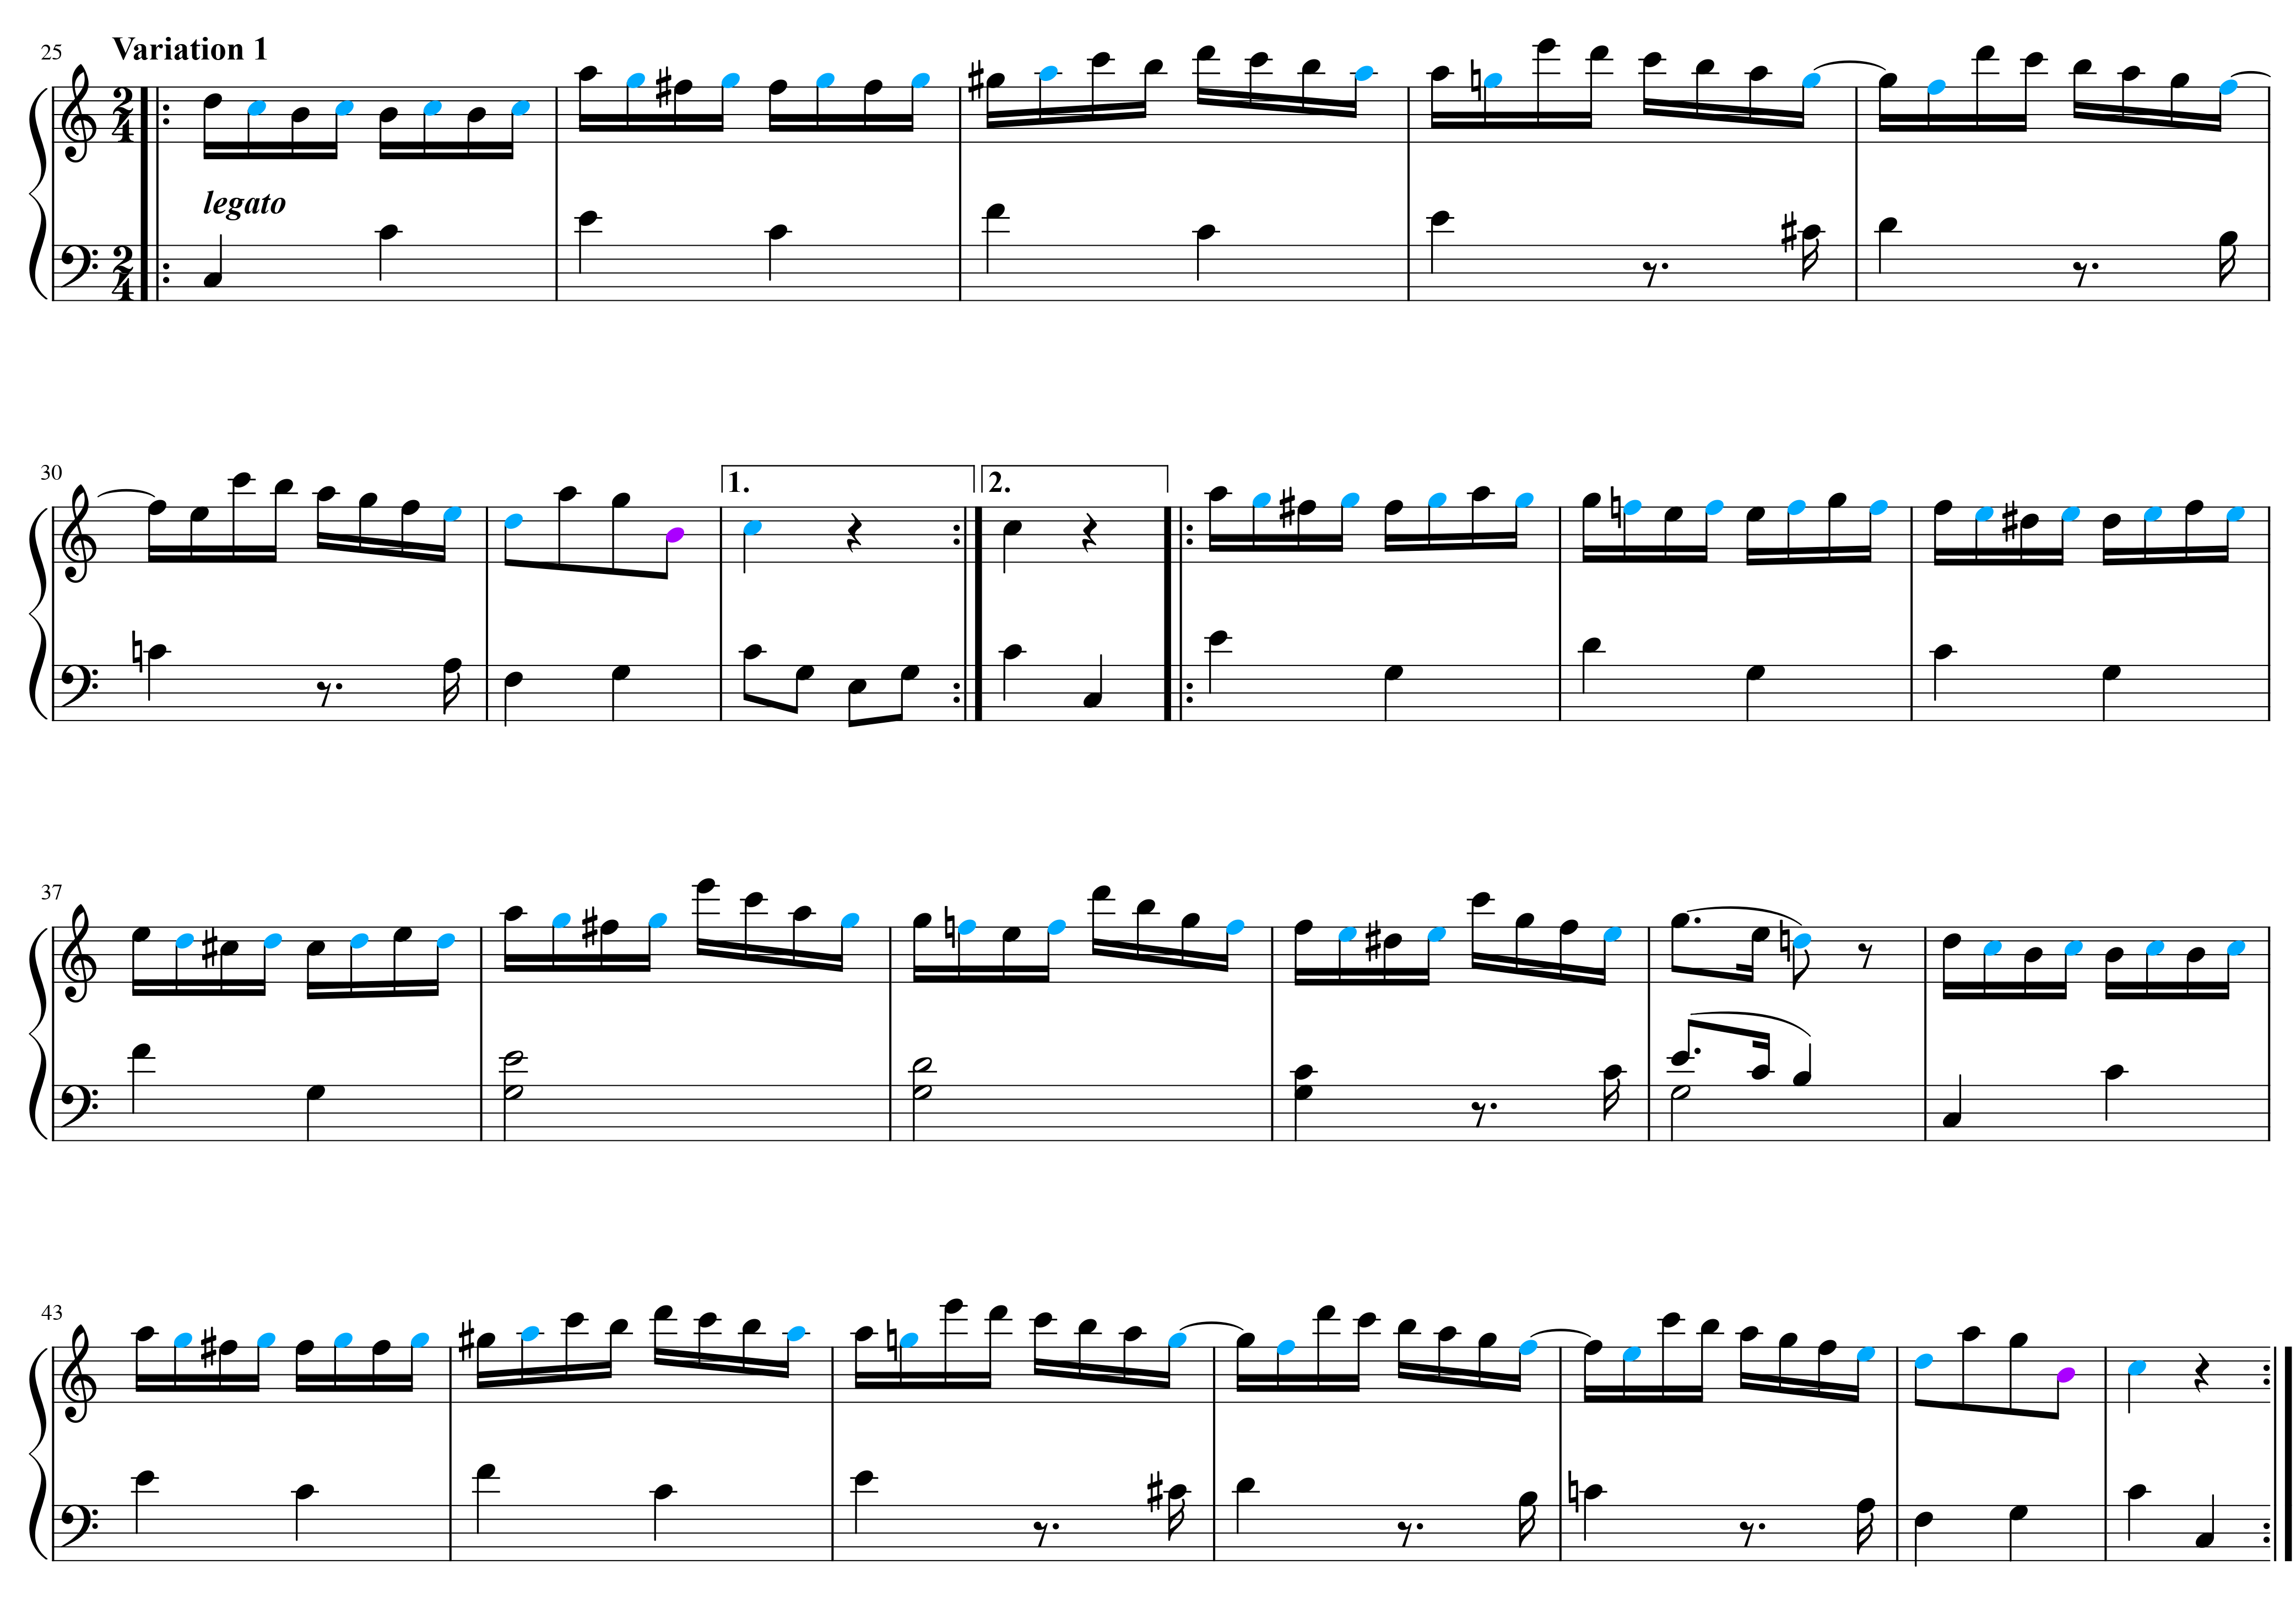 Variation 1 from Mozart's 12 Variations on Twinkle Twinkle Little Star with the melody notes highlighted in blue and the leading tones at the ends of each section highlighted in purple.